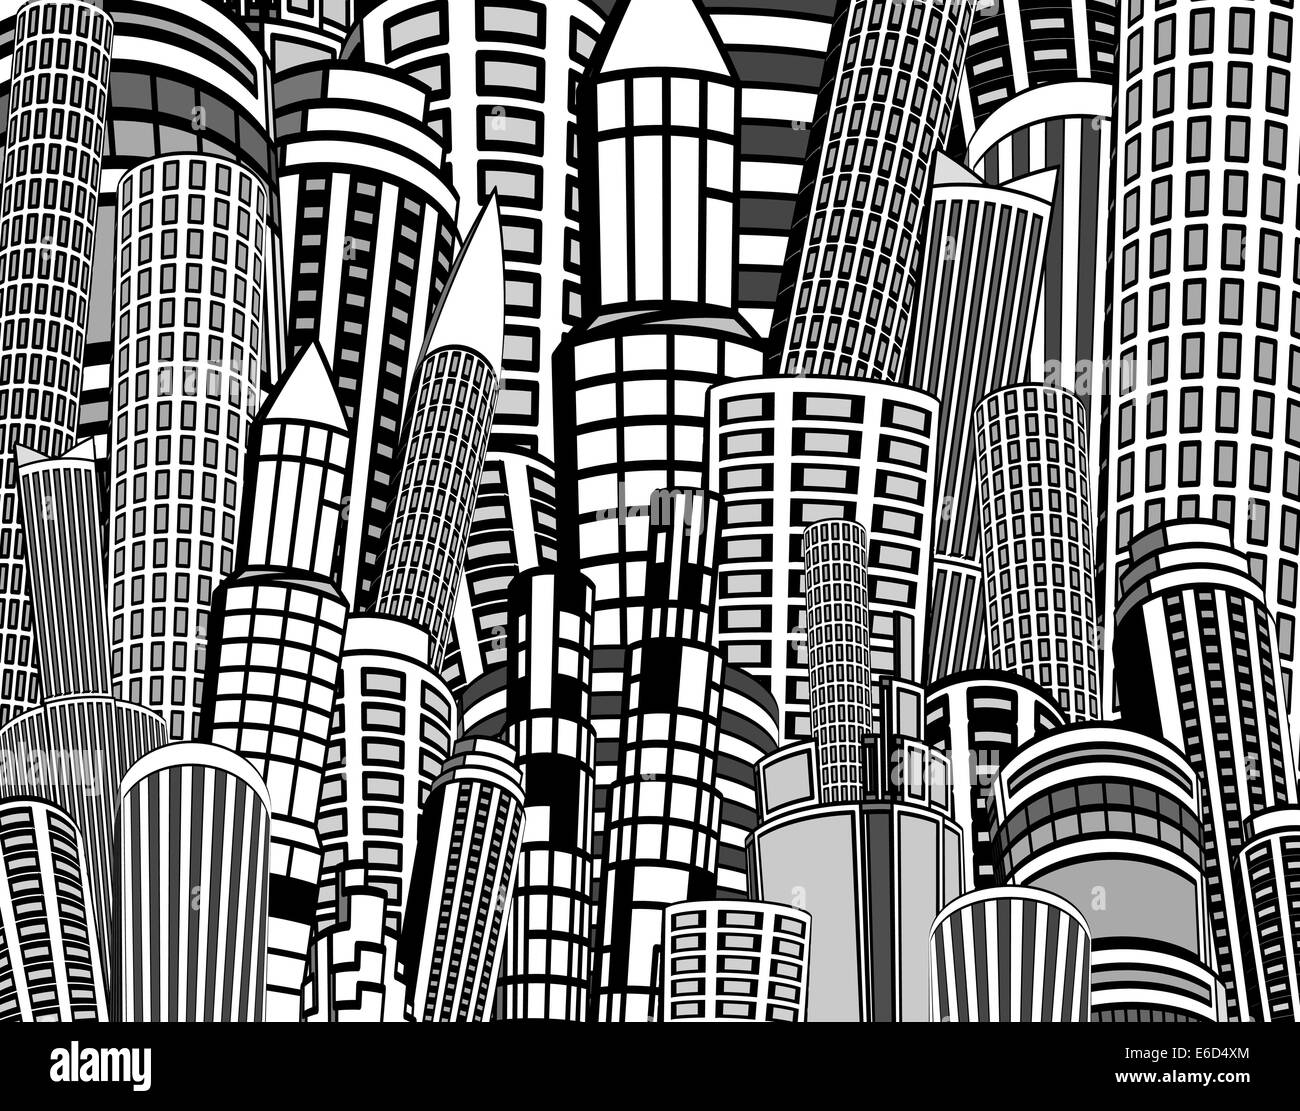 Cartoon buildings Black and White Stock Photos & Images - Alamy